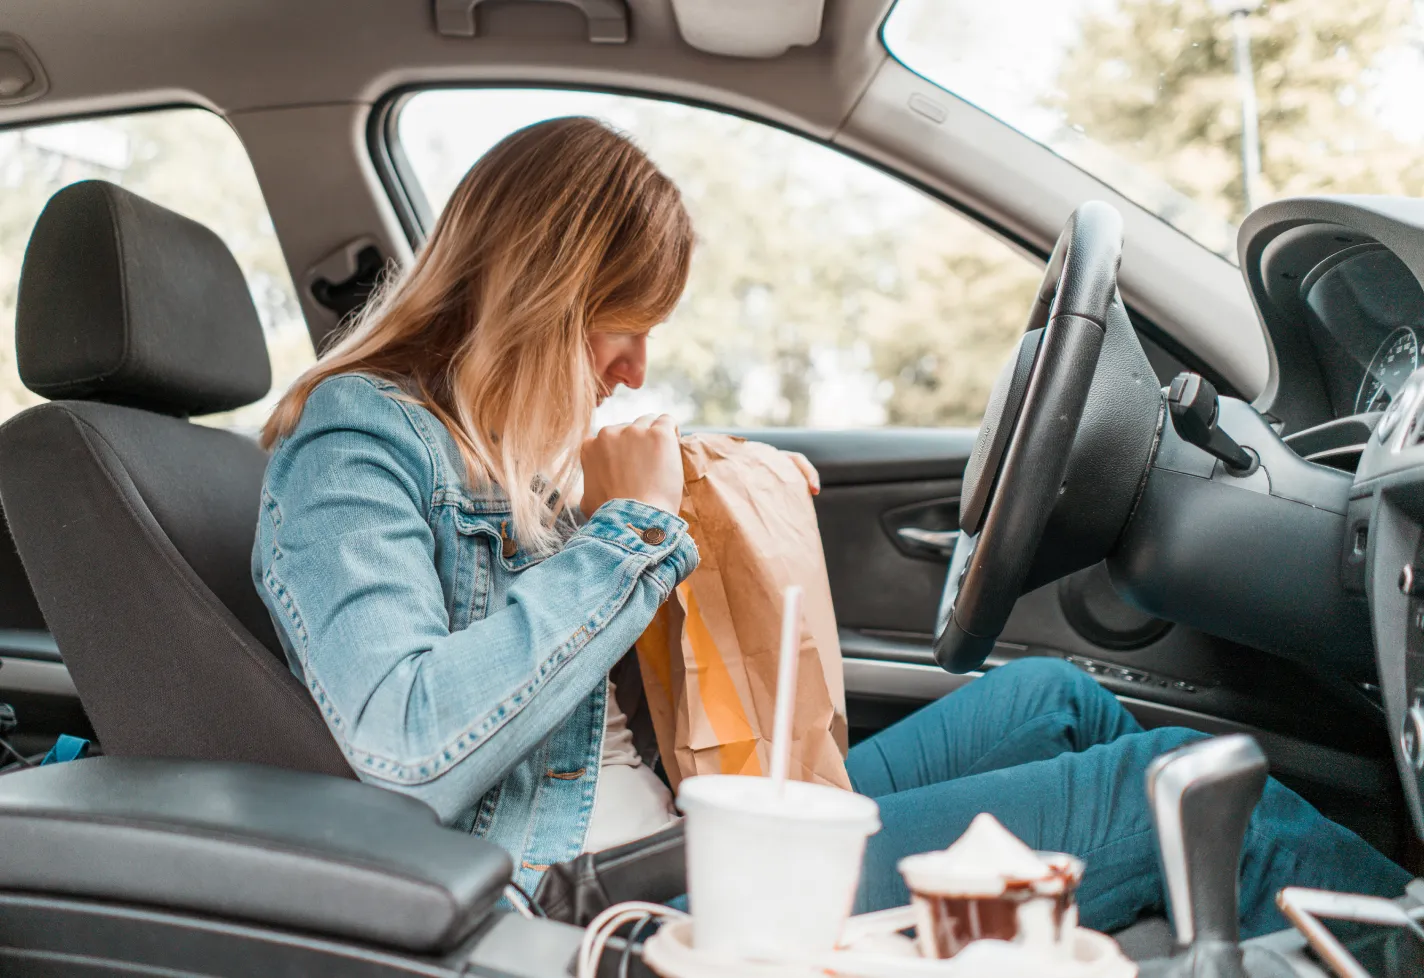 Women sitting in her car looking inside a brown paper bag carrying fast food. 